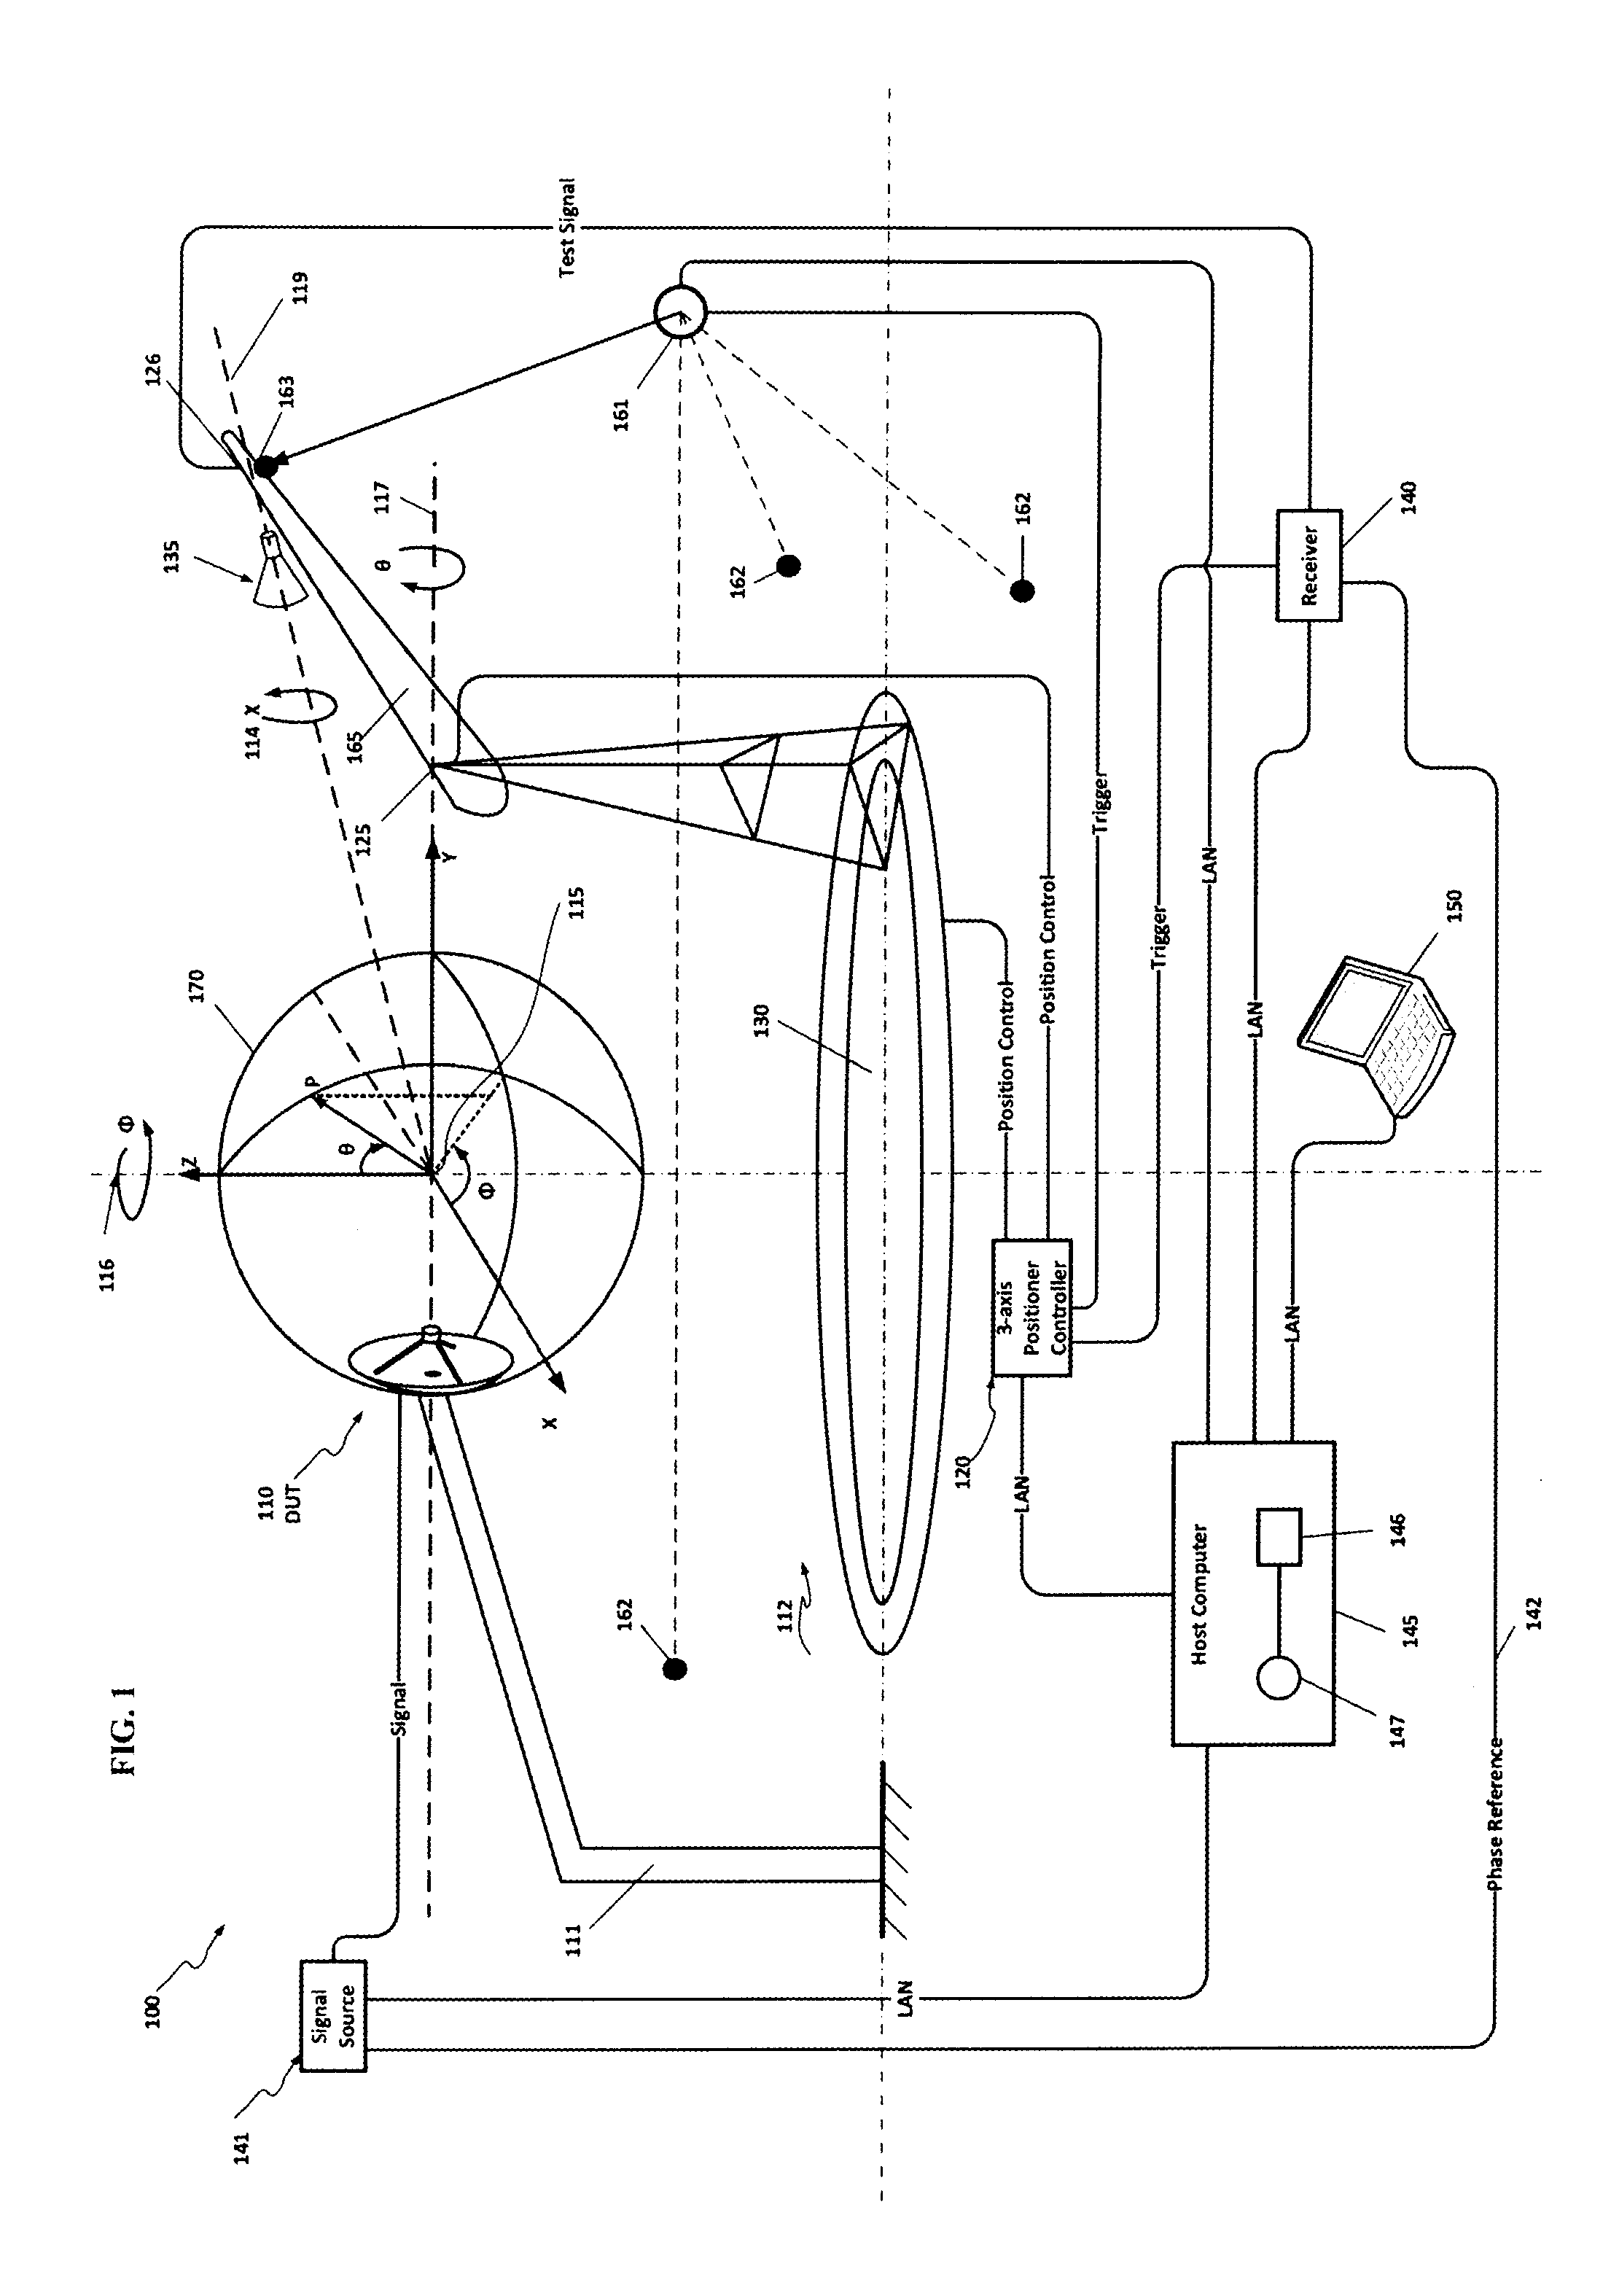 Radiation measurement system and method with synchronous high speed tracking laser based position measurement